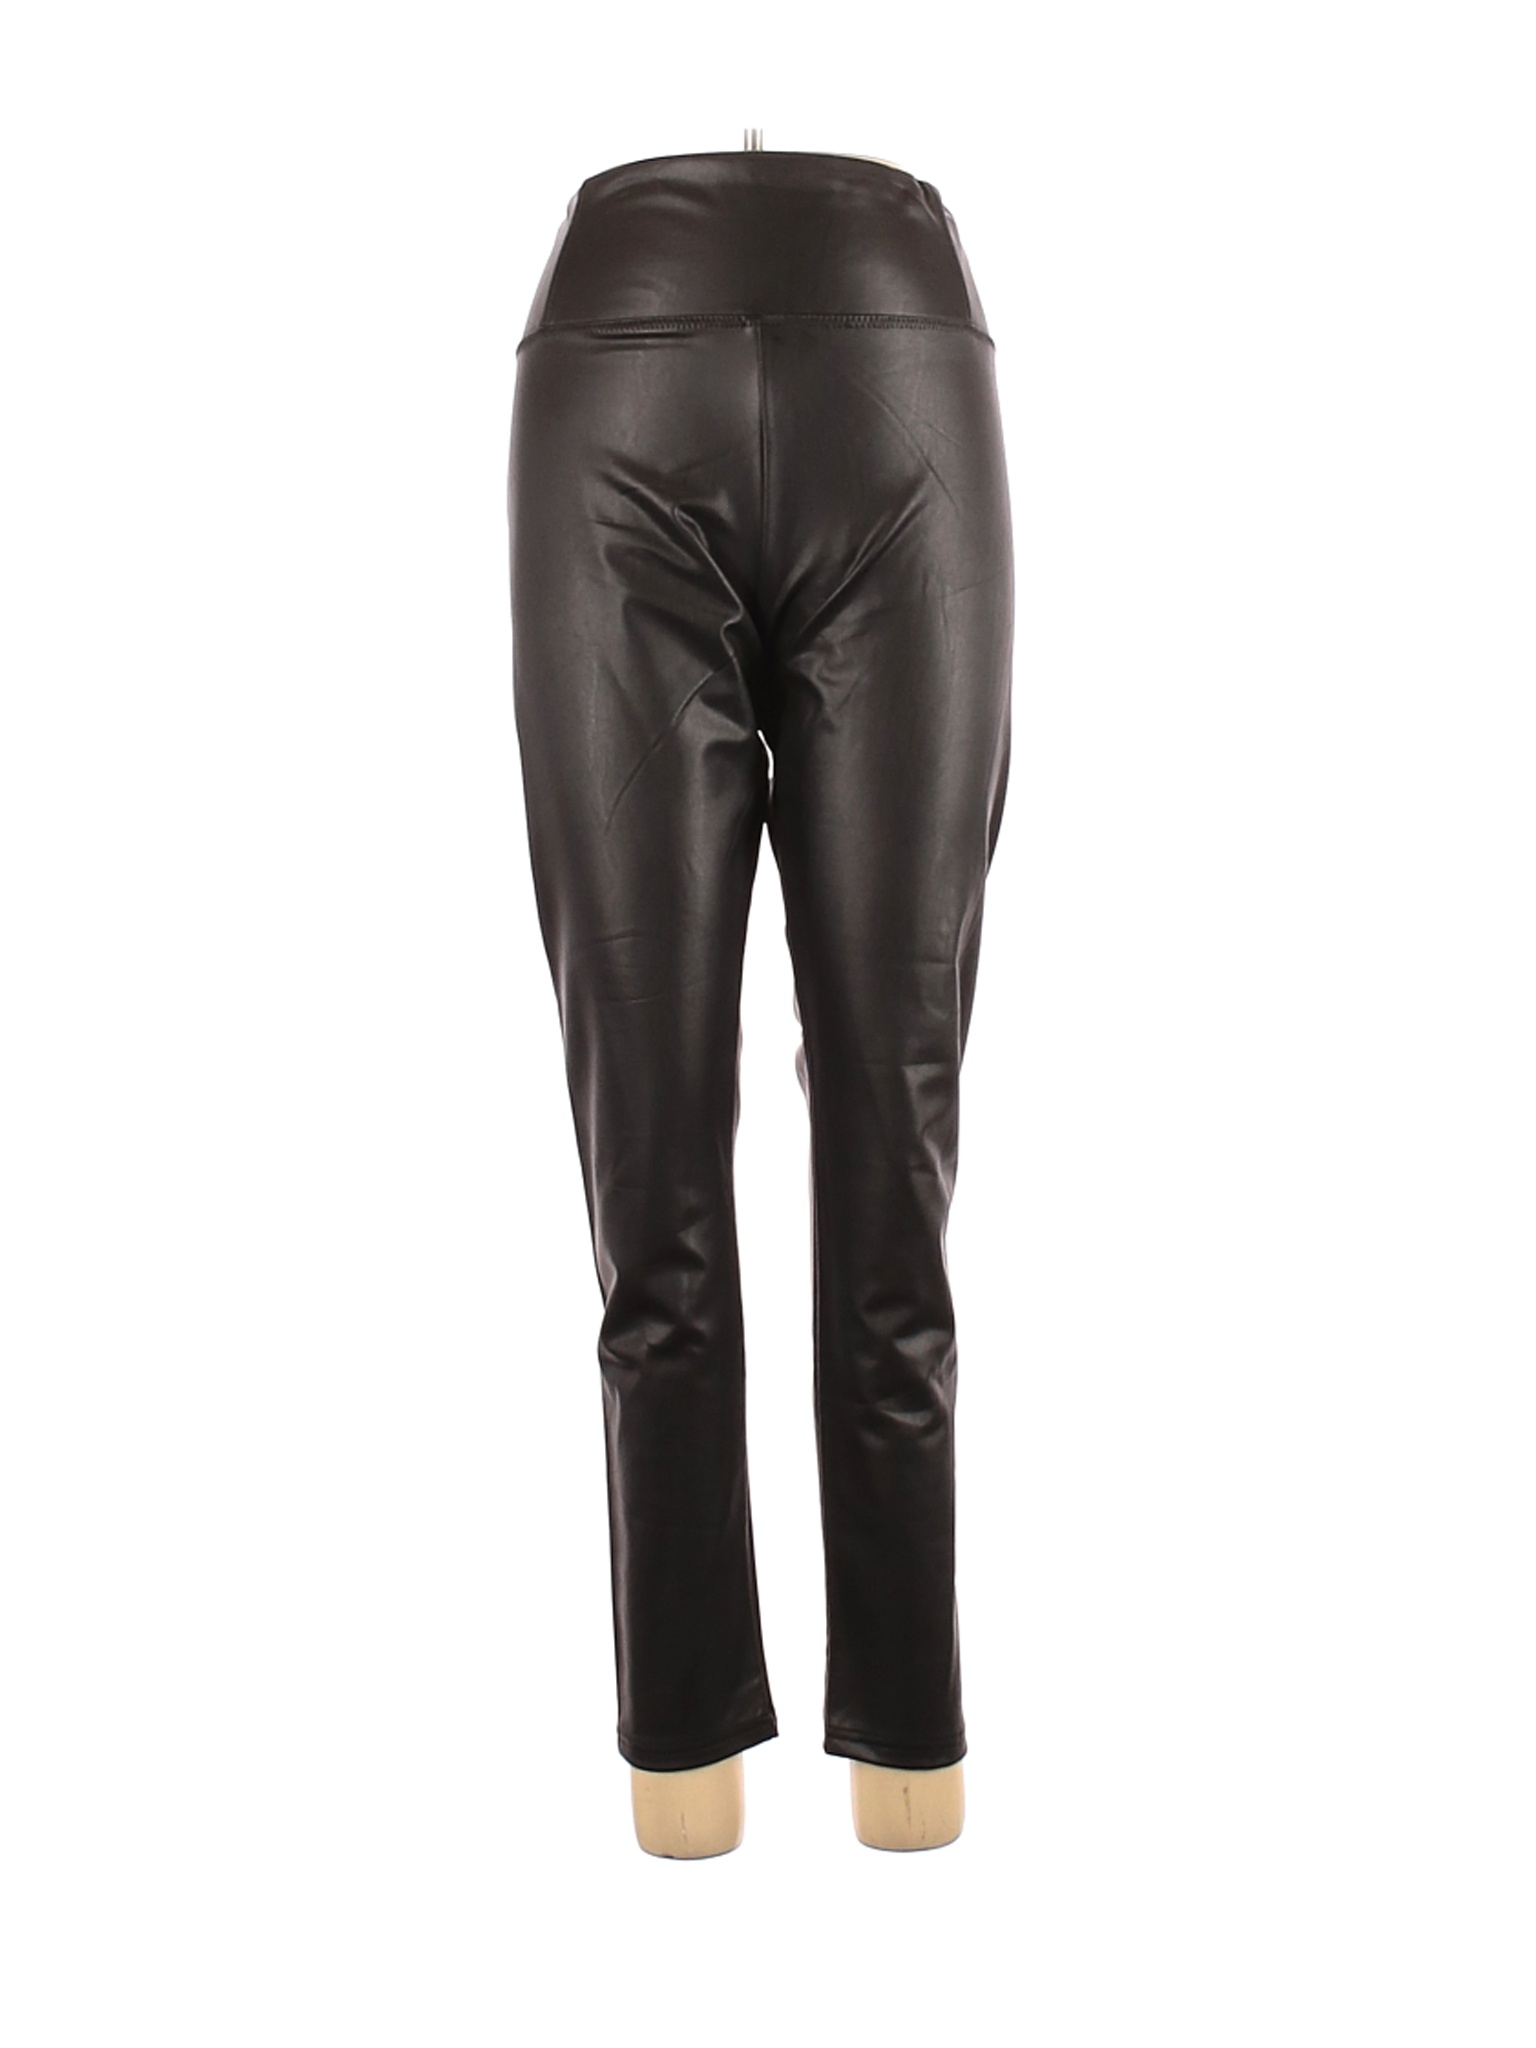 NWT 7 For All Mankind Women Black Faux Leather Pants XL | eBay